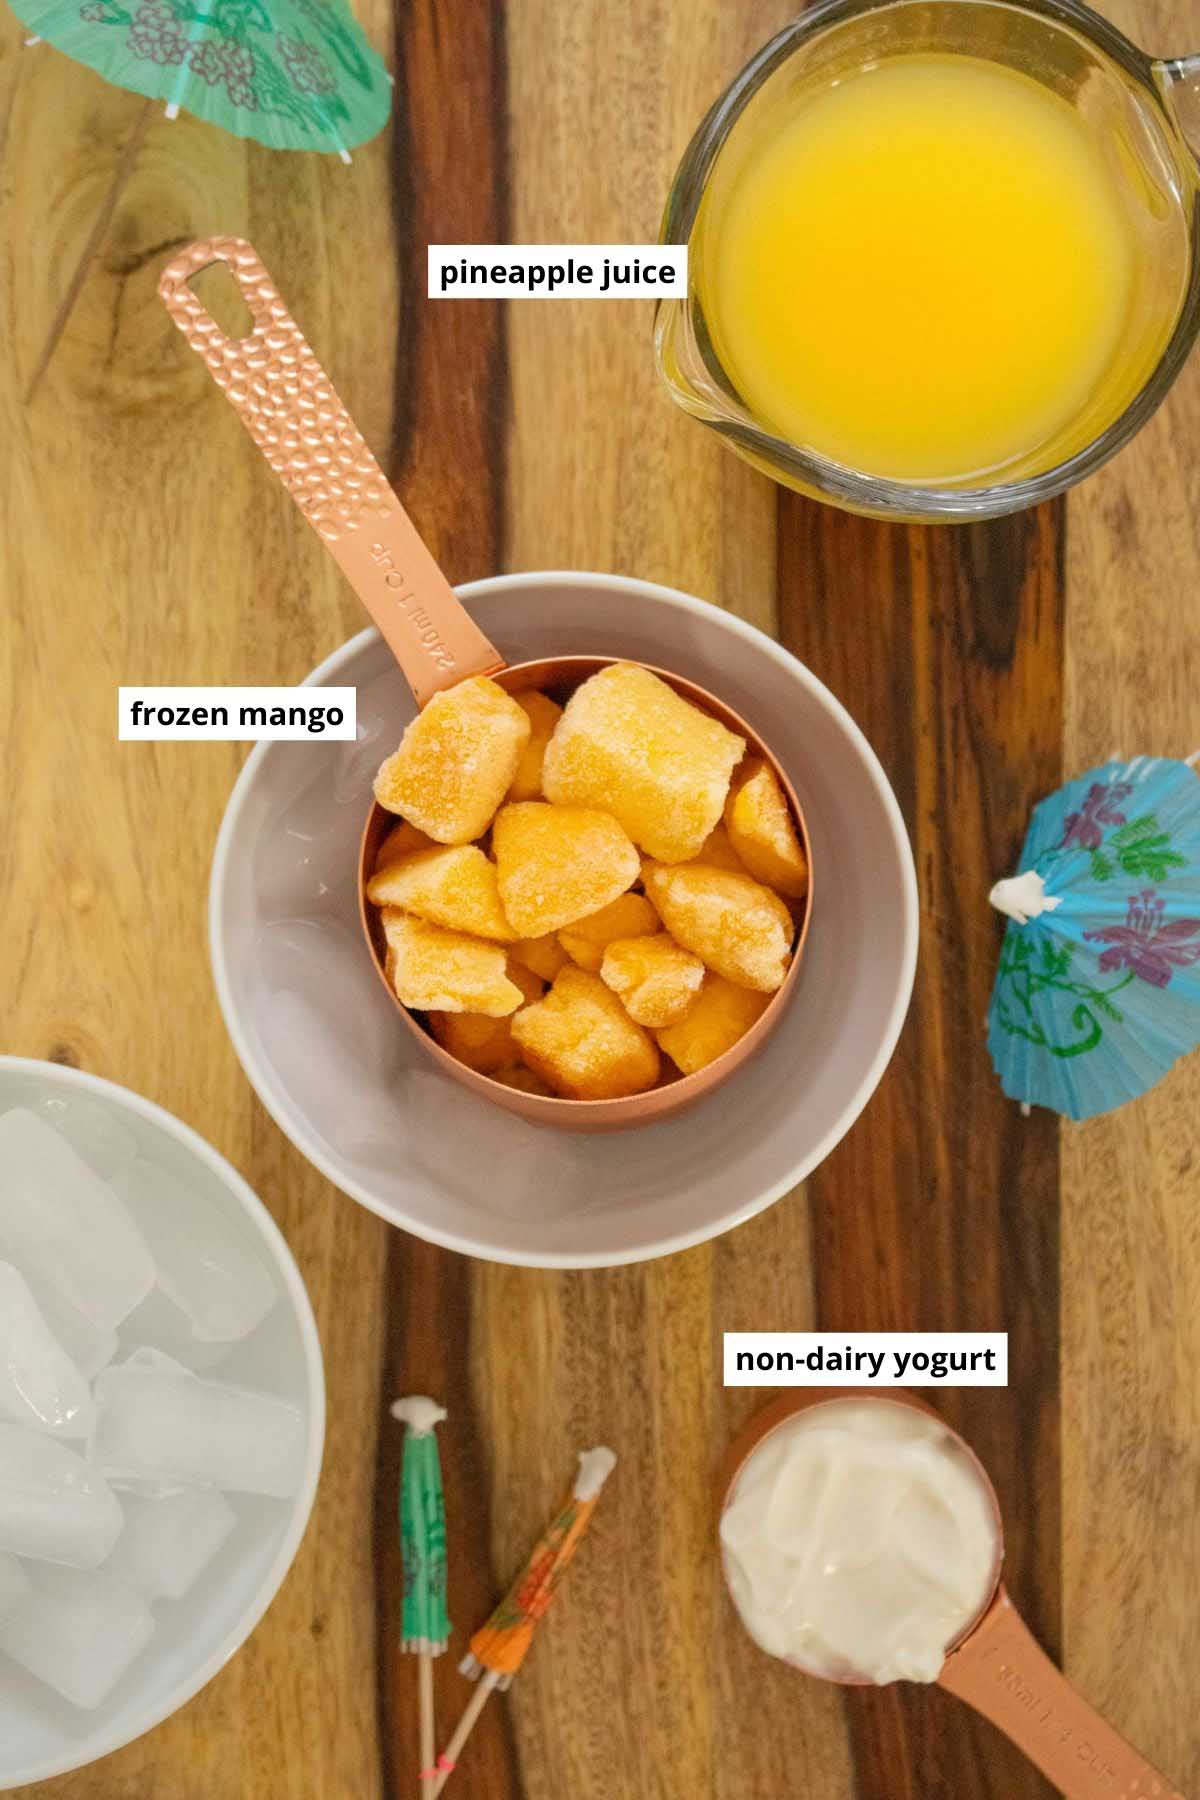 frozen mango, pineapple juice, non-dairy yogurt, and ice in bowls on a wooden countertop